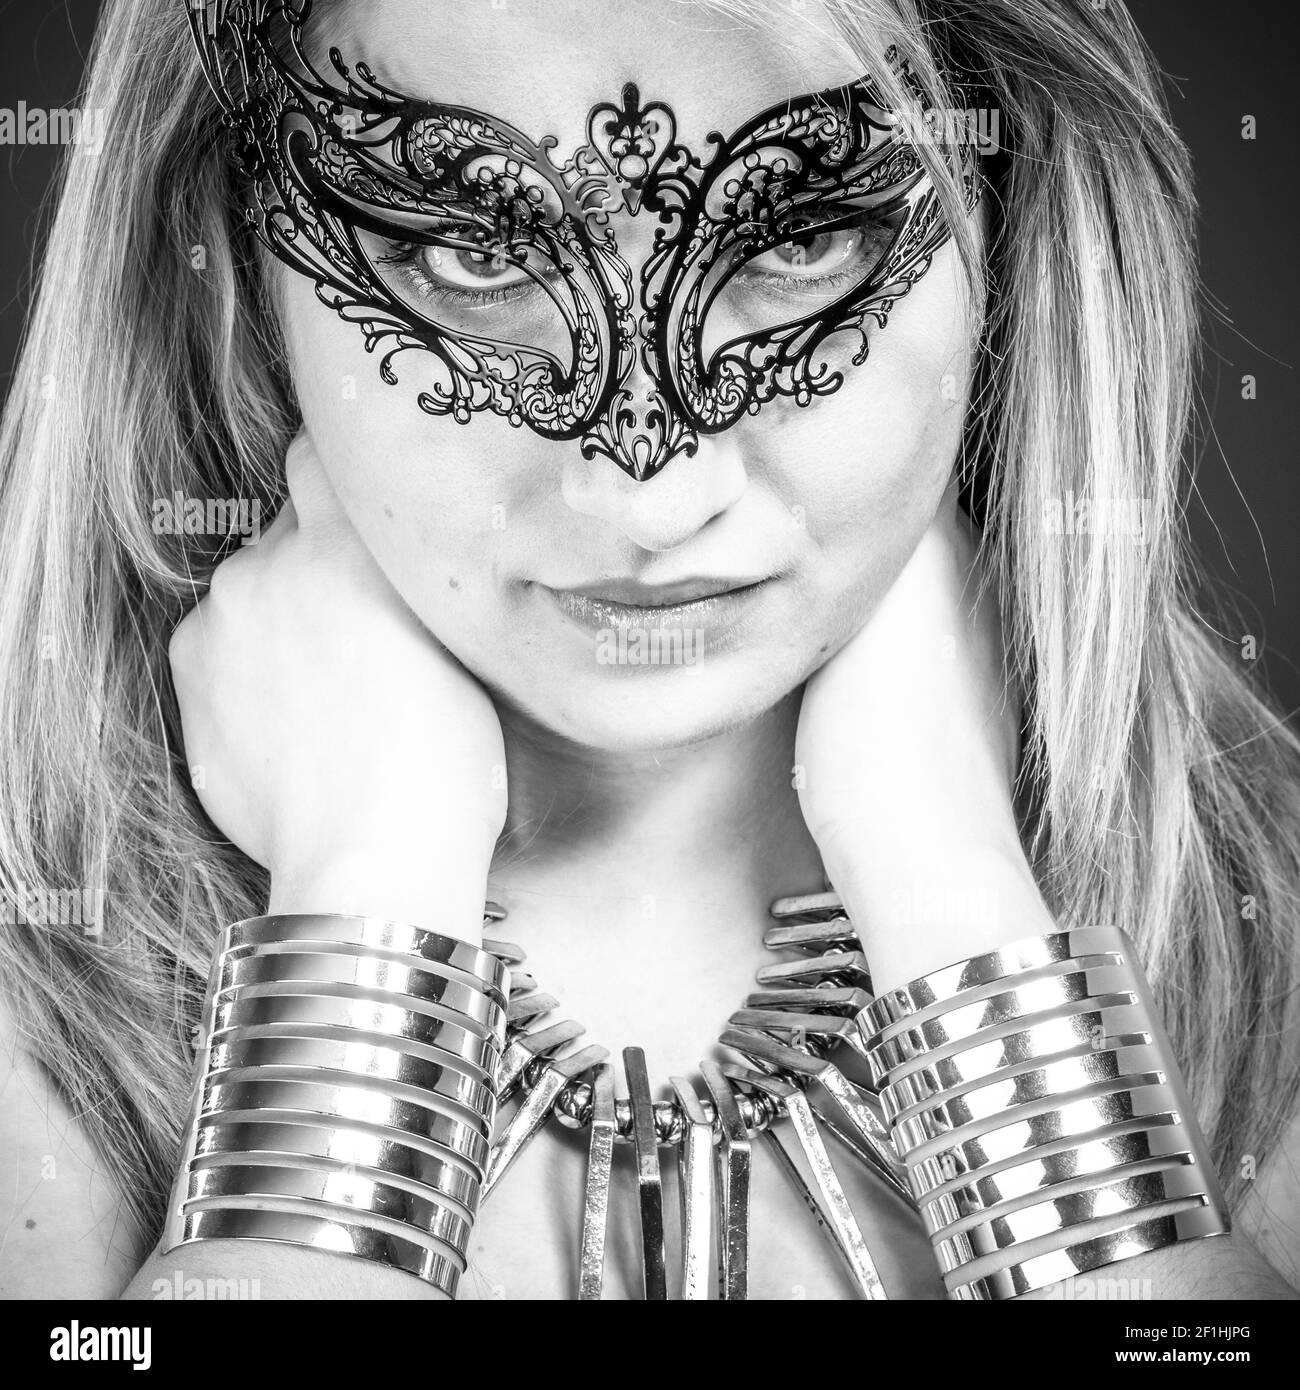 Performer, Beautiful blonde with silver jewelry and mask Stock Photo